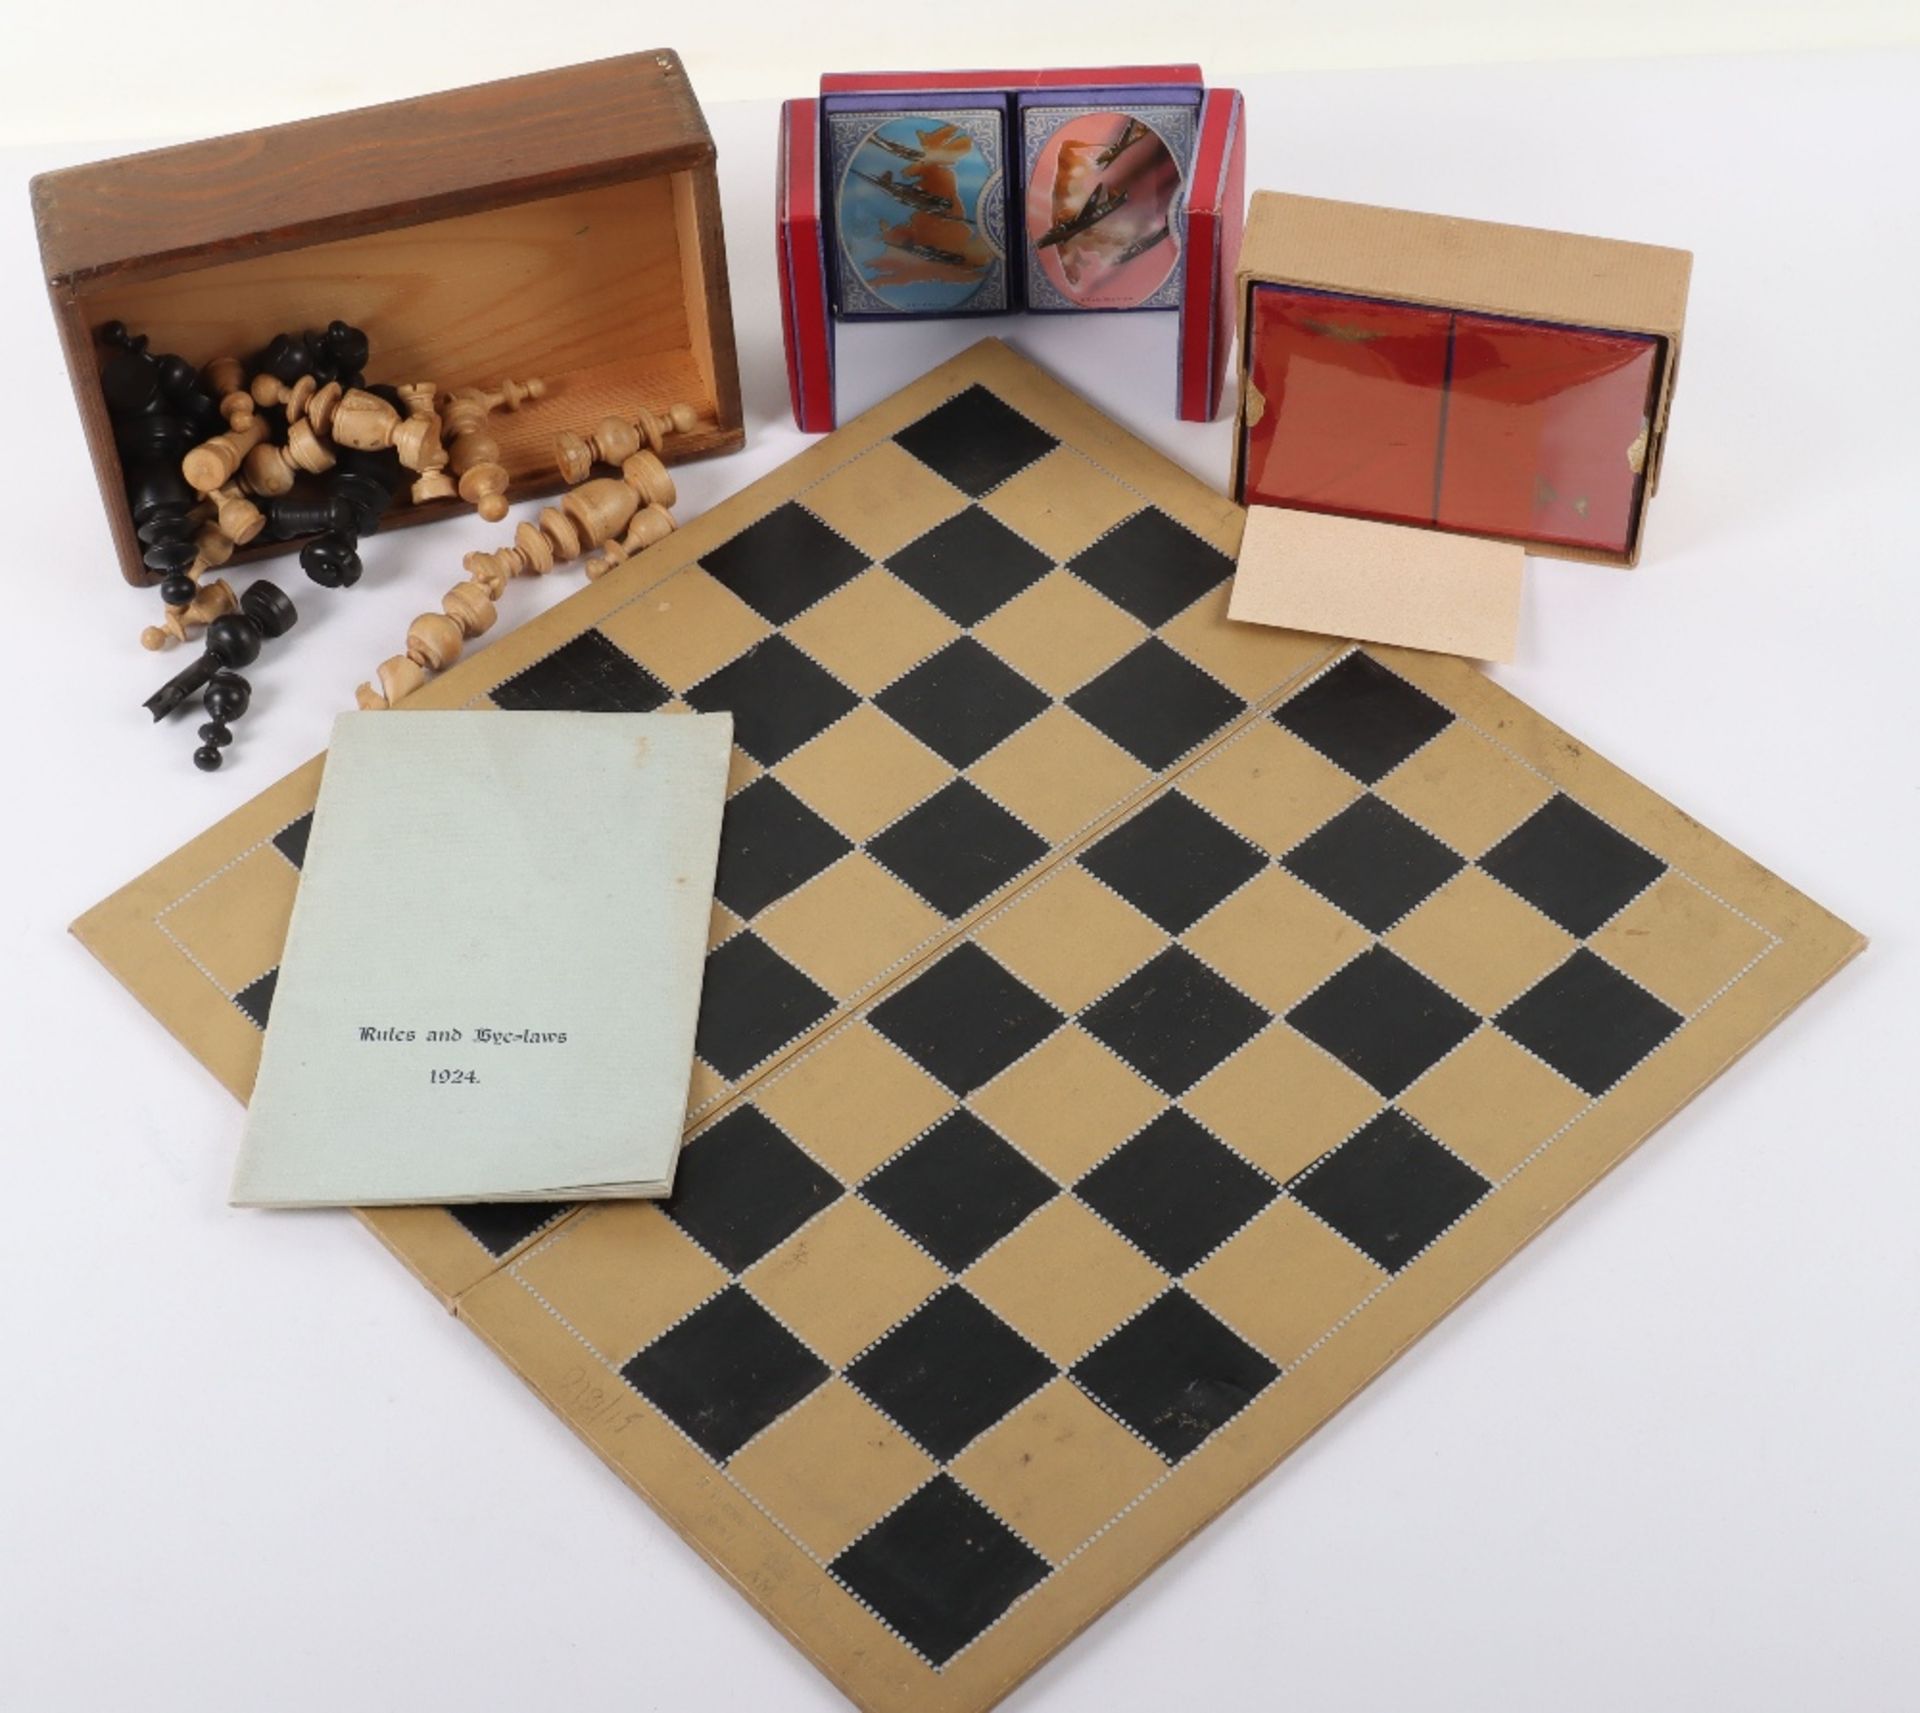 WW2 RAF Gamed Board/Chess Set and Card Sets - Image 2 of 7